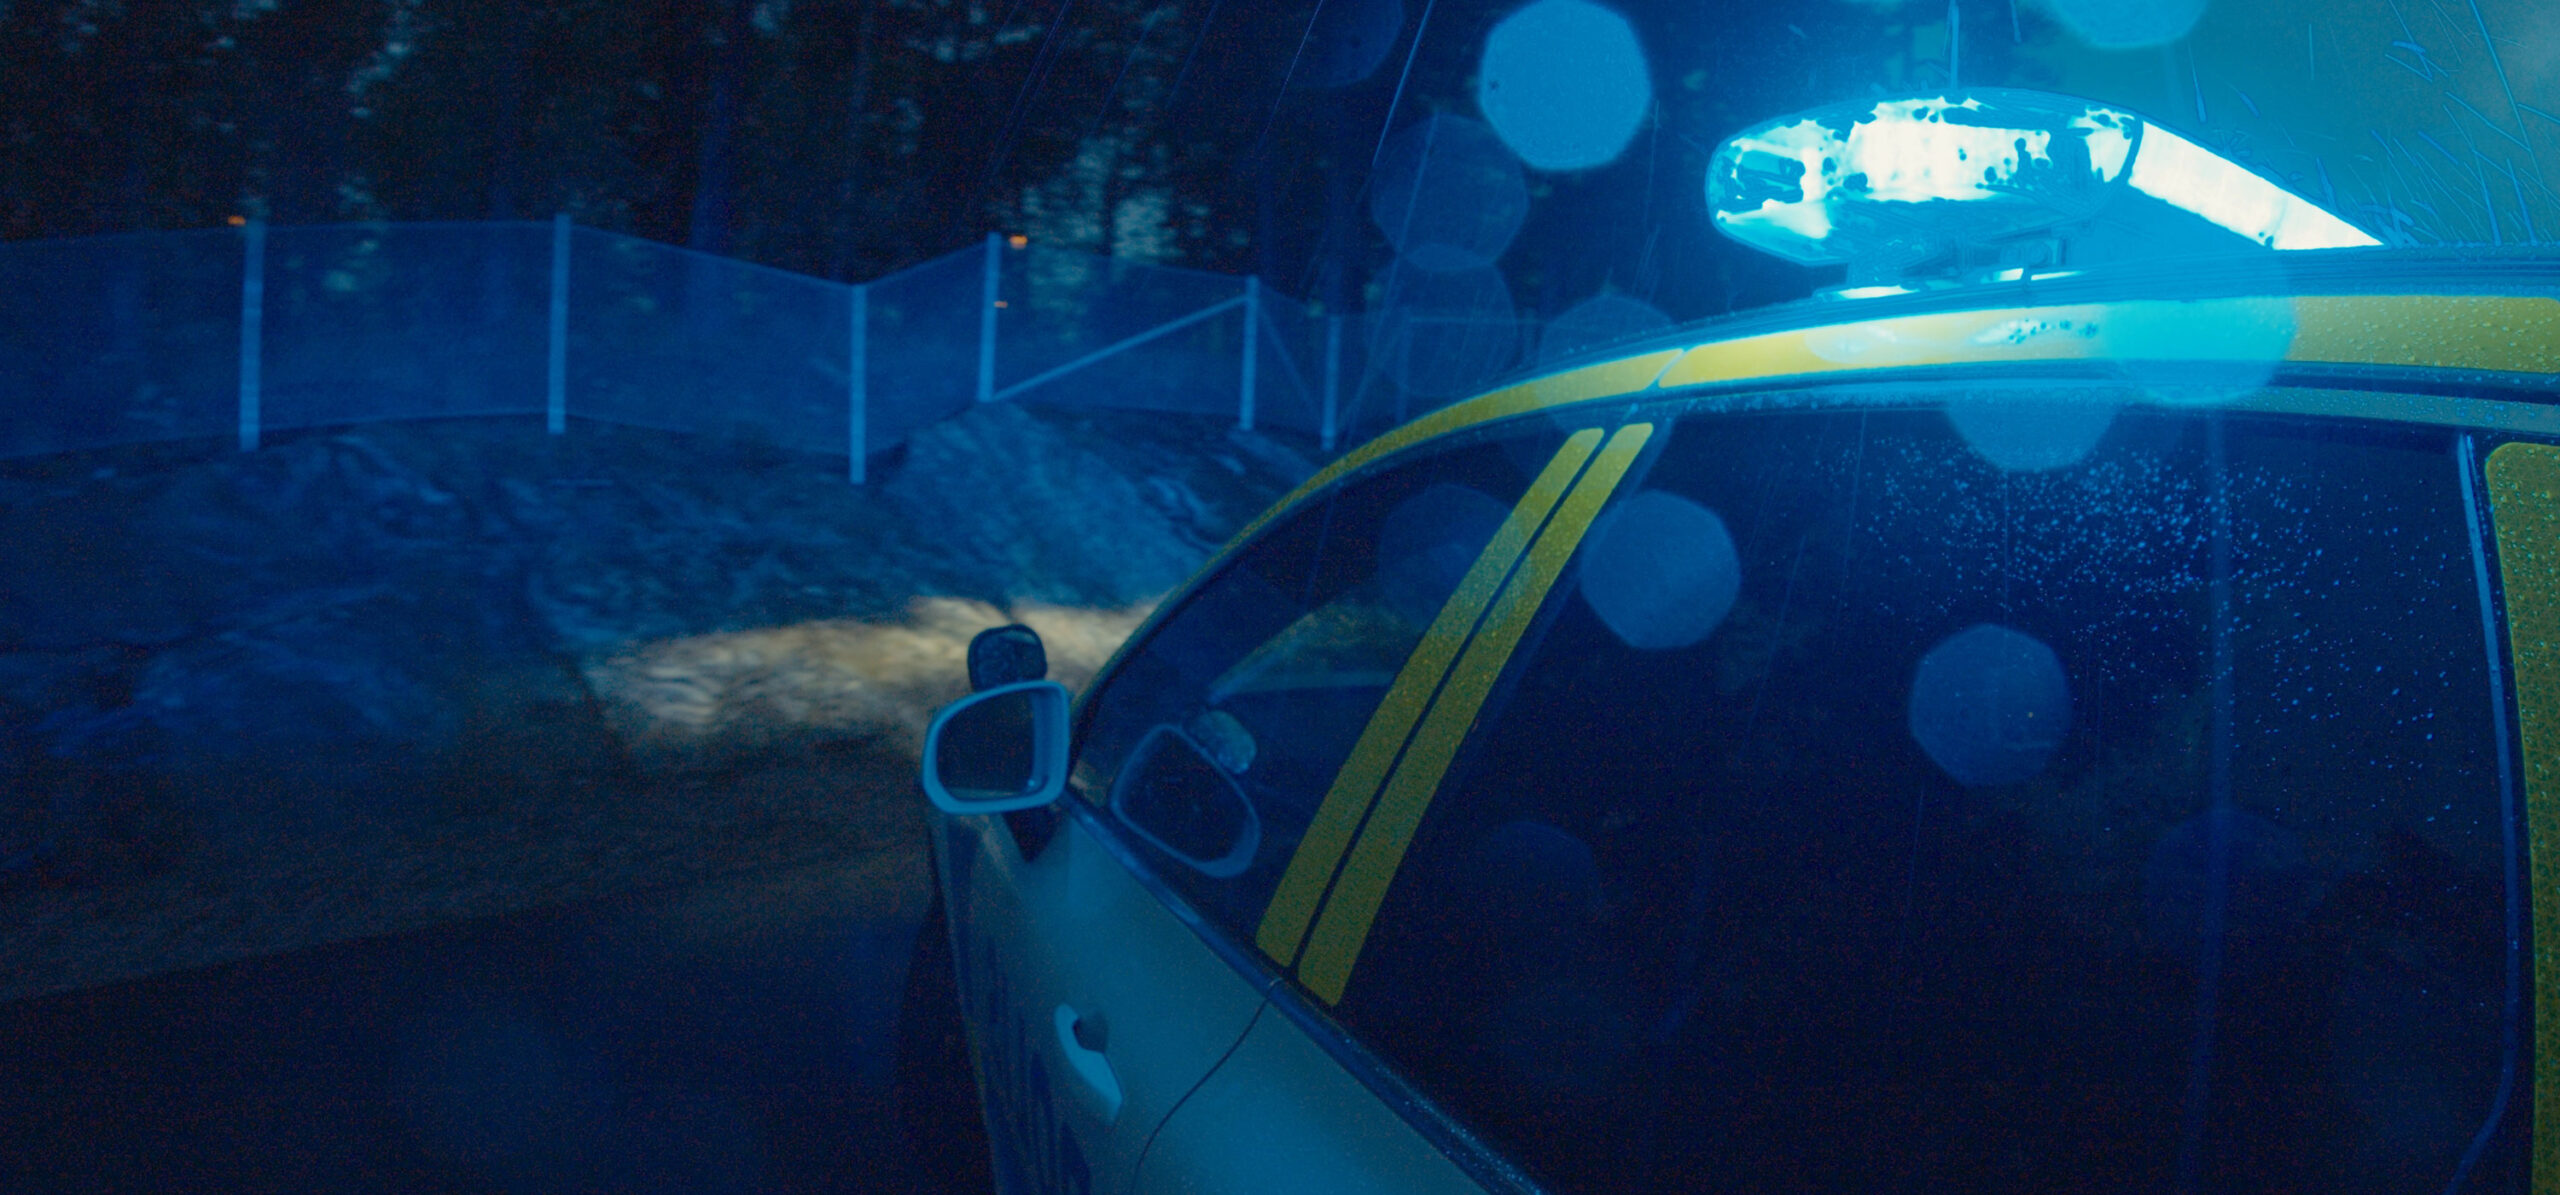 Lightbar on Car at Night Lit Blue, Screen Glares around lightbar on top of a white vehicle with yellow graphics, wooded location behind fence in background